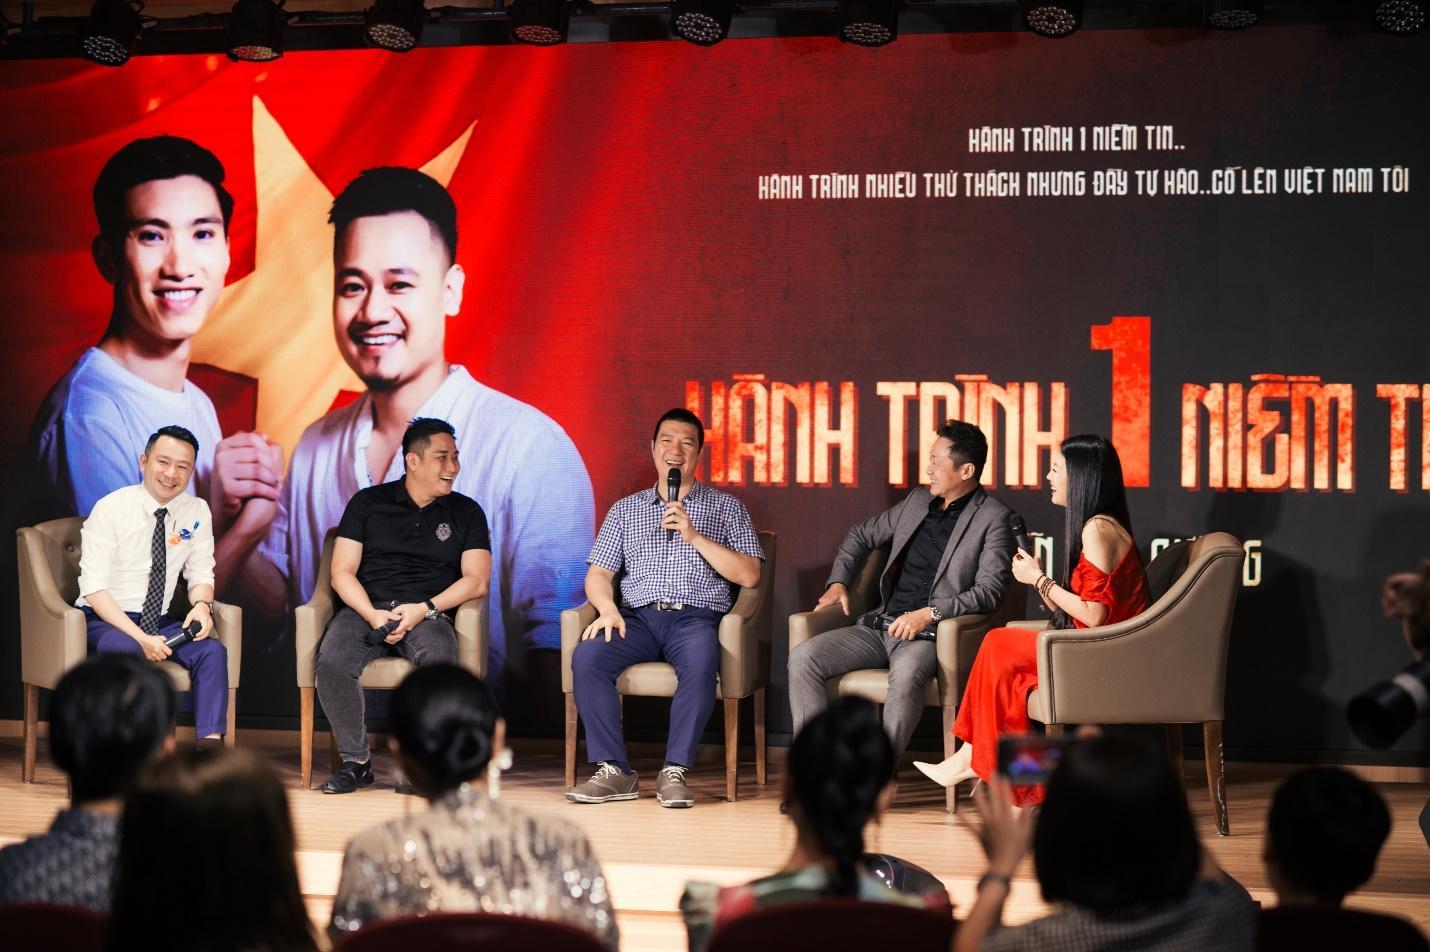 Doan Van Hau was present at The One to support musician Nguyen Duc Cuong to launch the MV Journey of 1 Faith - Photo 3.